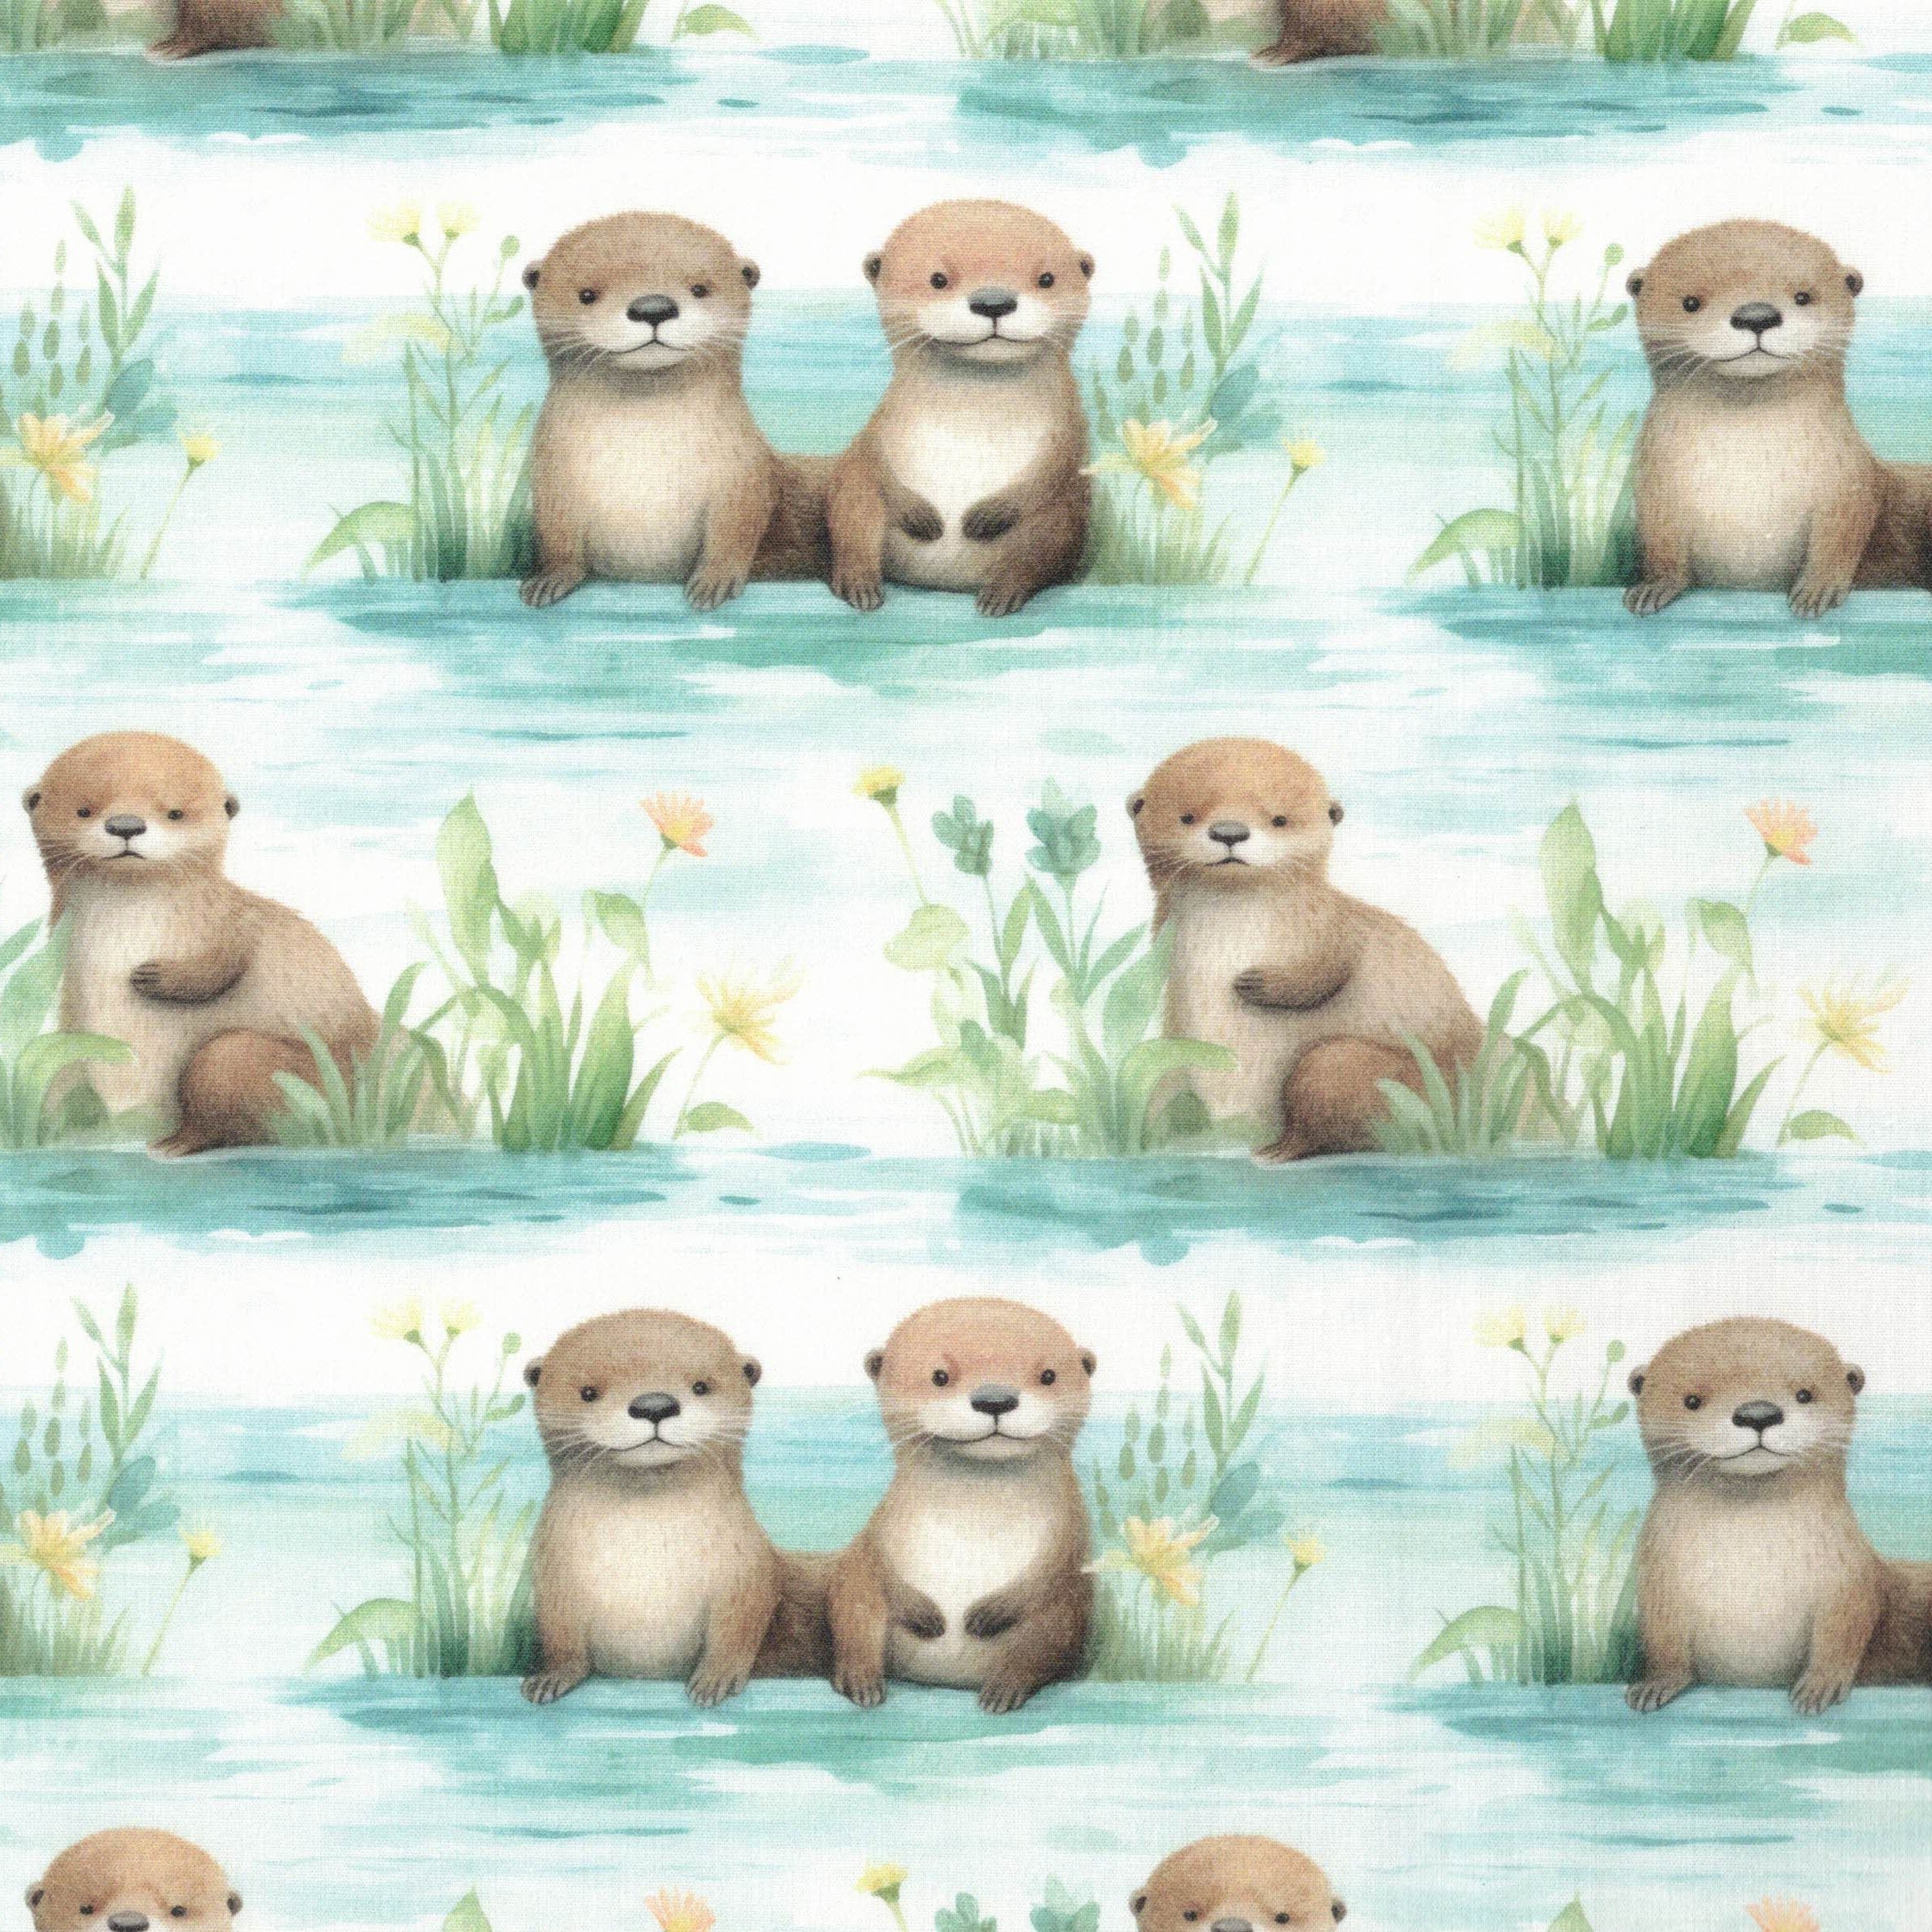 PRE-ORDER Quirky Cotton Animal Nature Wildlife Pup Mammal Aquatic Rivers Sea Light Blue (PRE-ORDER QC Baby Otters)